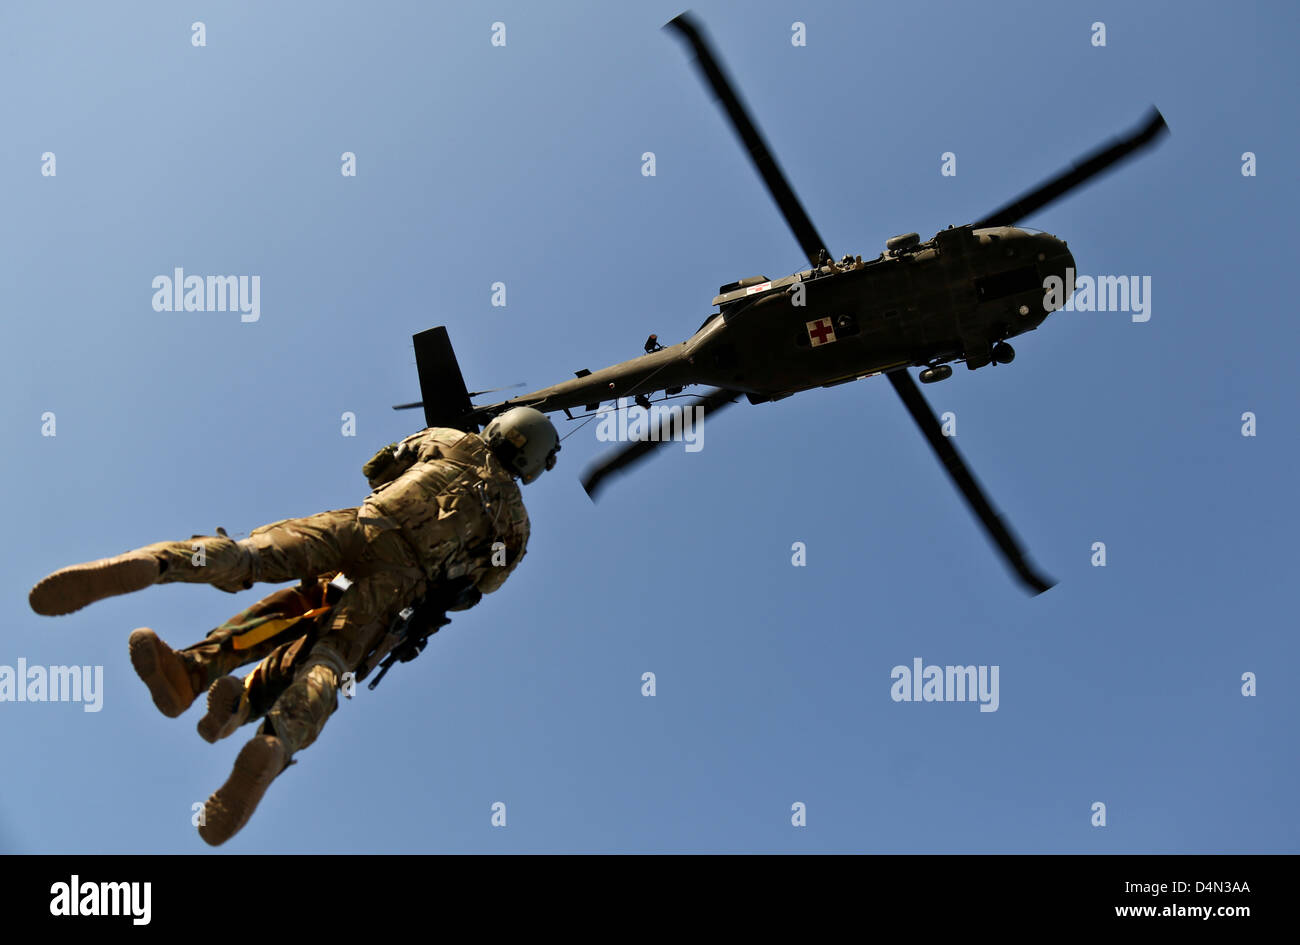 A US Army flight medic and an Afghan National Army commando are hoisted to a US Army UH-60 Black Hawk helicopter during extraction training March 4, 2013 in Bihsud district, Nangarhar province, Afghanistan. ANA commandos and coalition forces conducted the training in preparation for possible casualty extractions during combat operations. Stock Photo